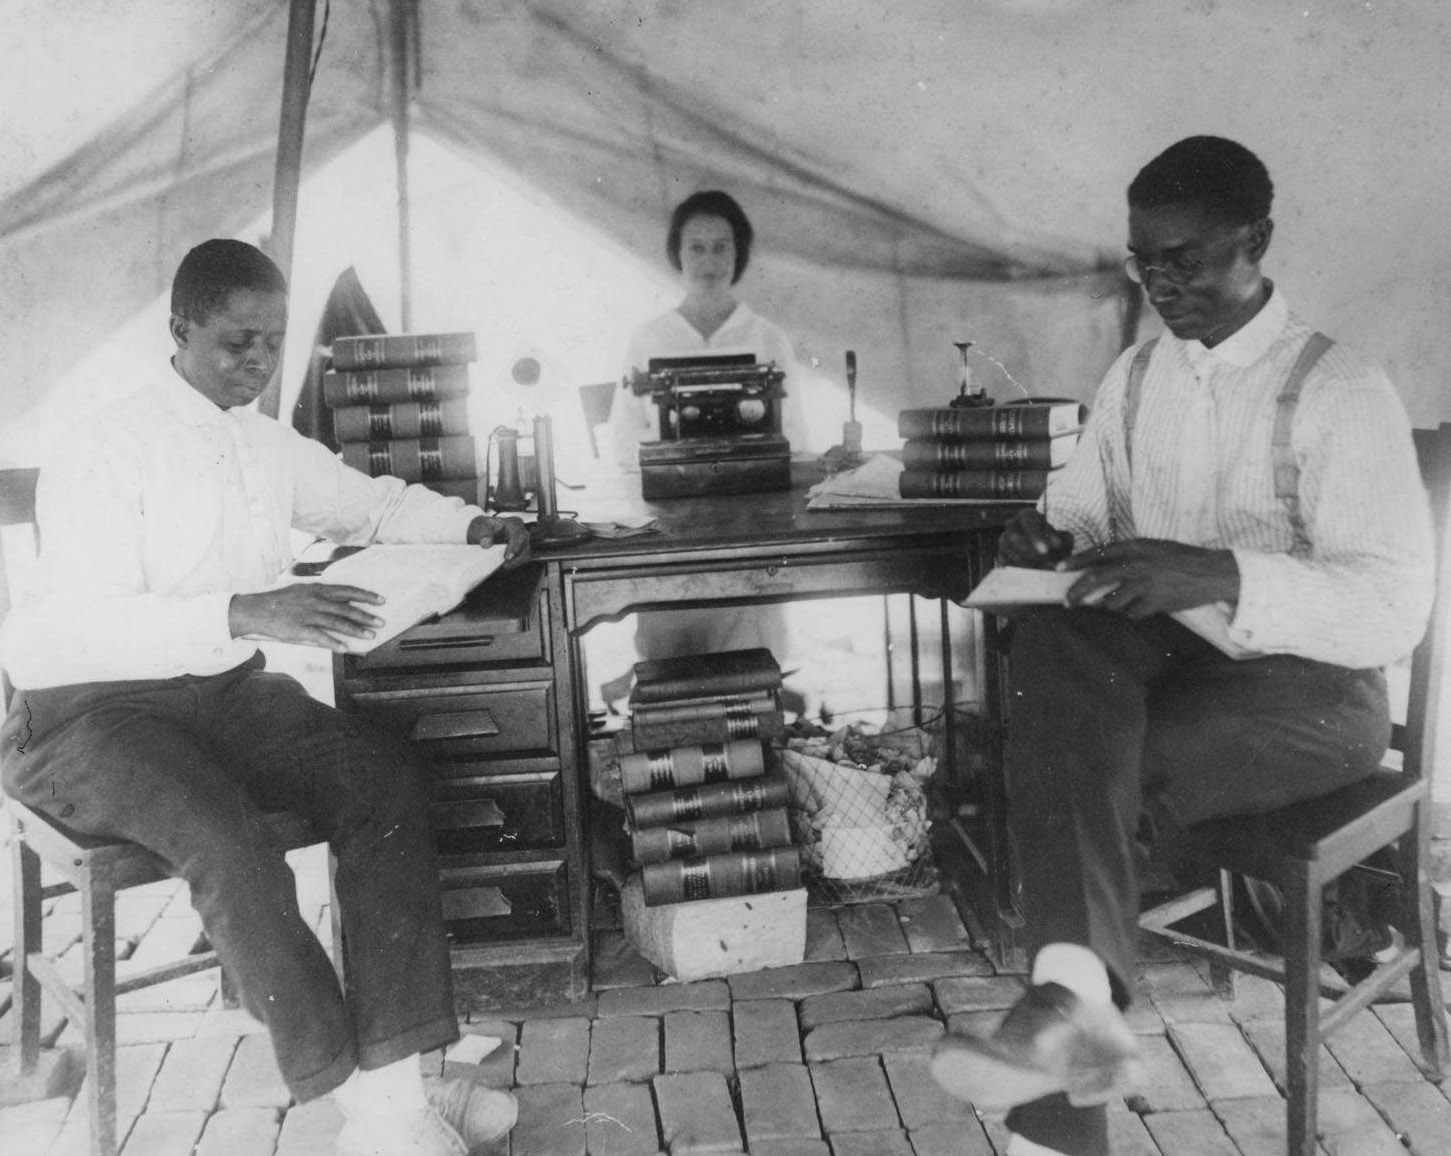 After the 1921 Tulsa Race Massacre, attorney B. C. Franklin (right) set up his law office in a tent. On the left is I. H. Spears, Franklin's law partner. These men worked to prevent dispossession of Greenwood residents.